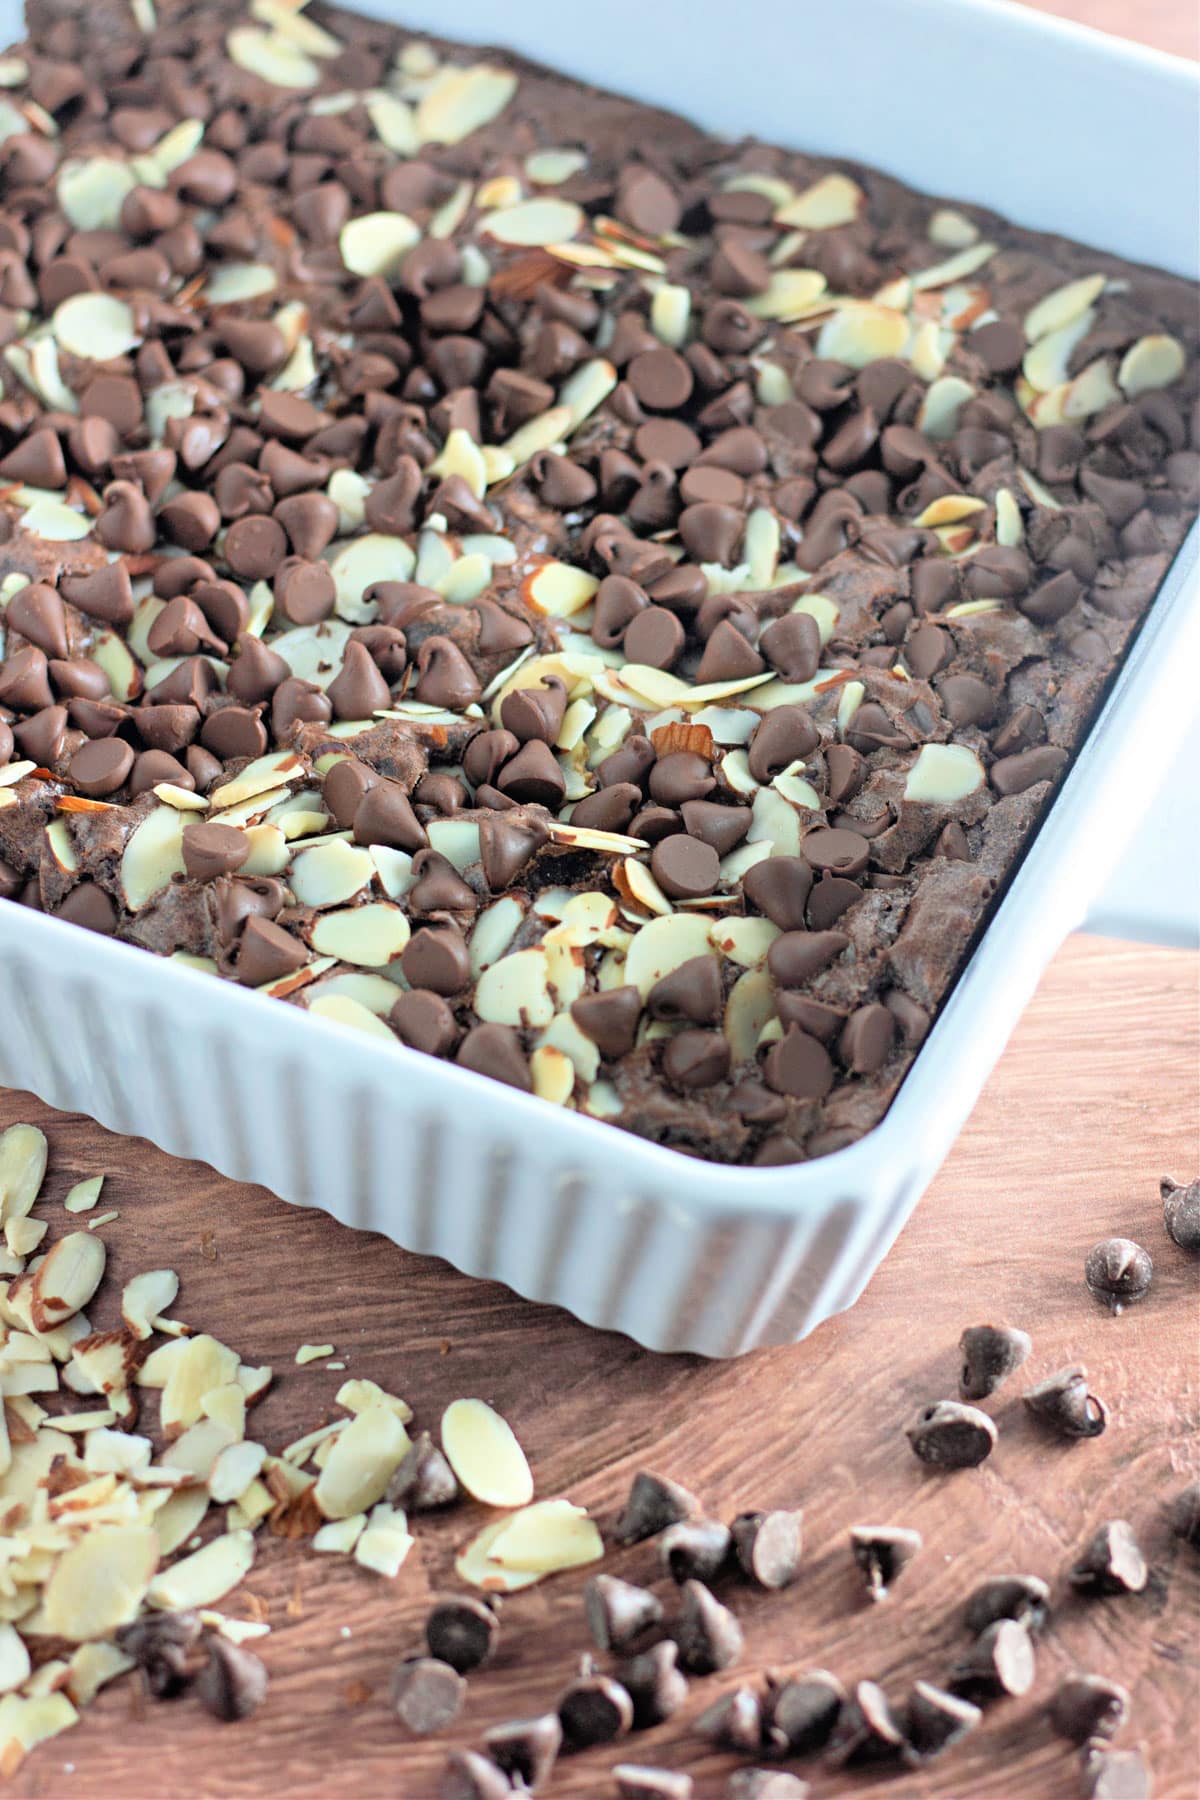 Just baked coconut brownies with almonds in a white baking dish.